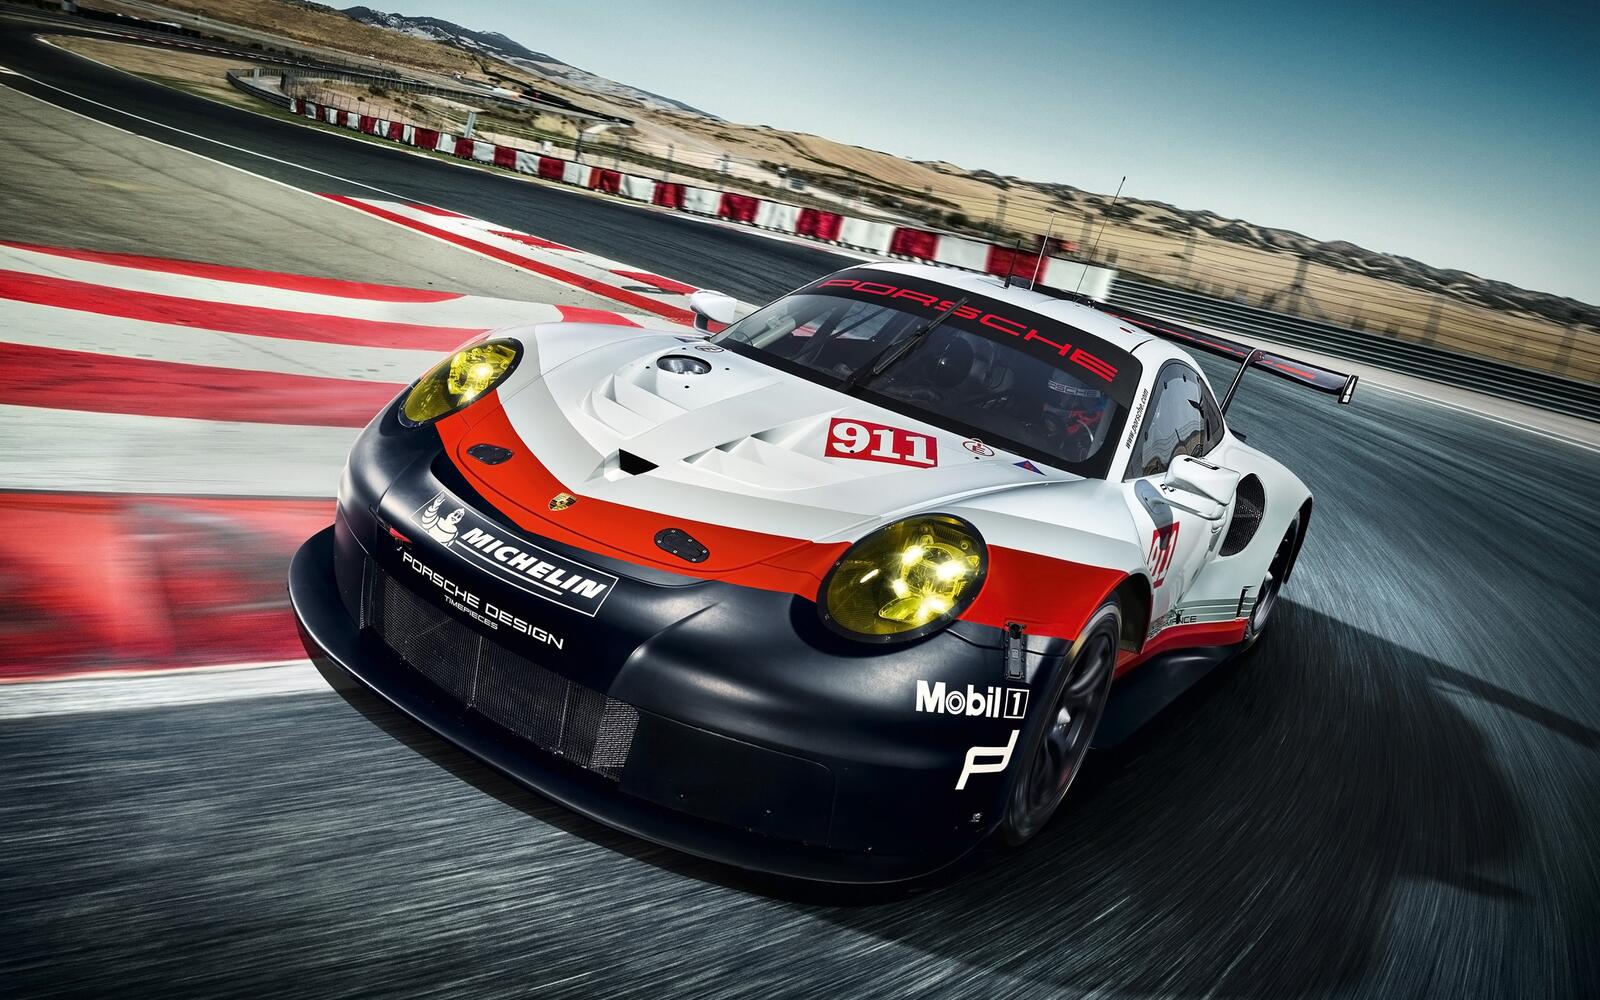 Free photo Porsche 911 rsr on a closed circuit race track